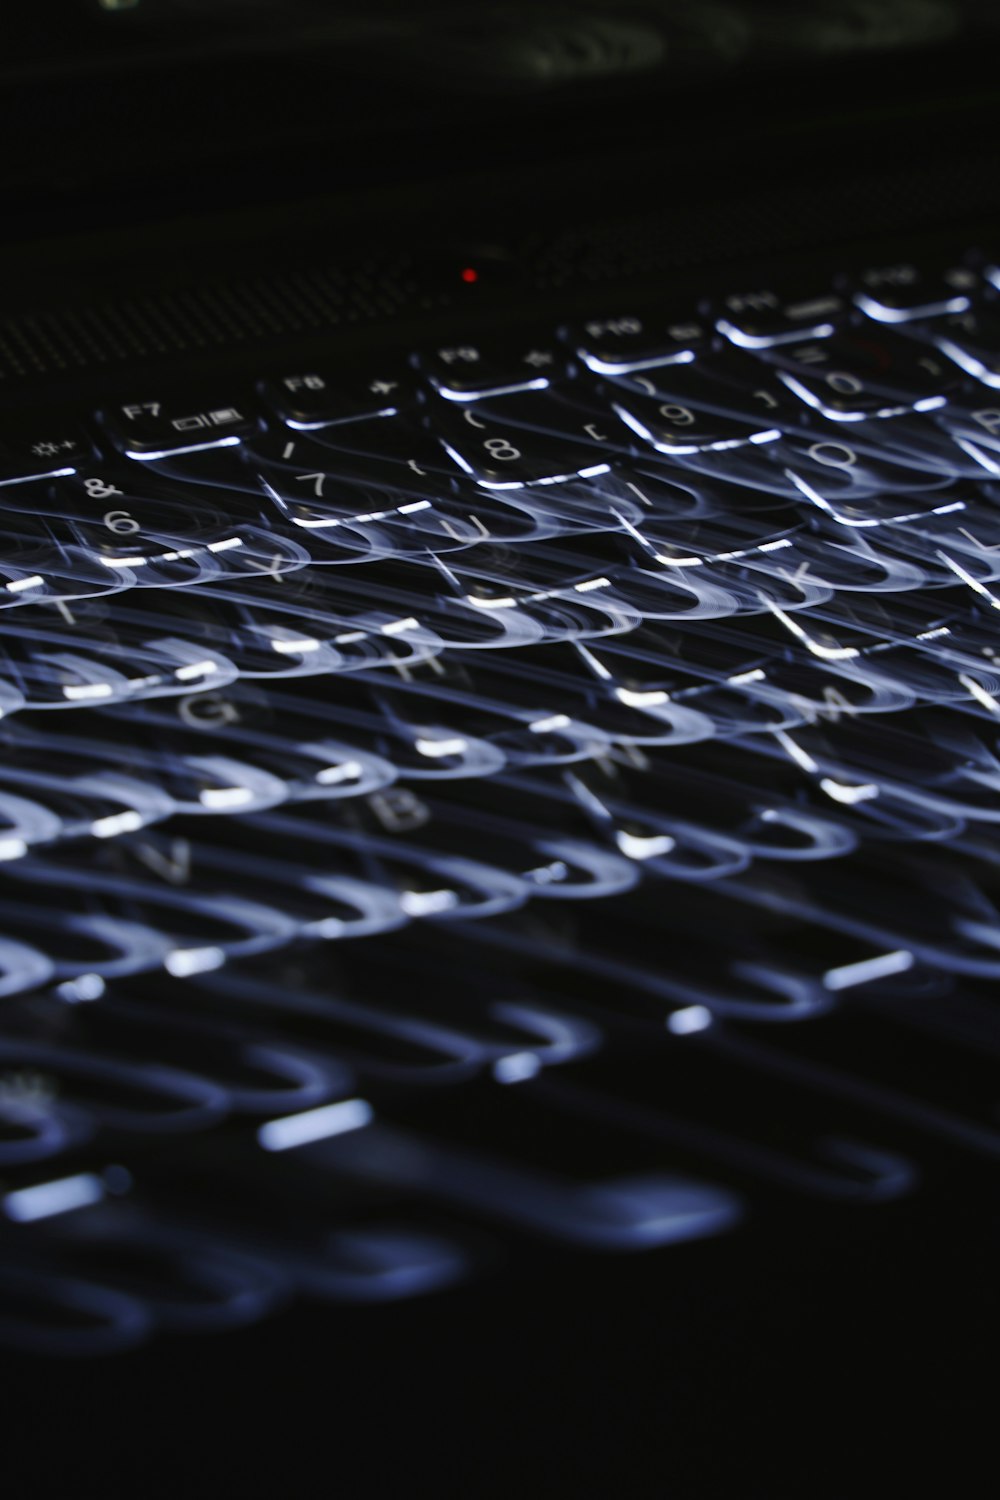 a close up of a computer keyboard on a table